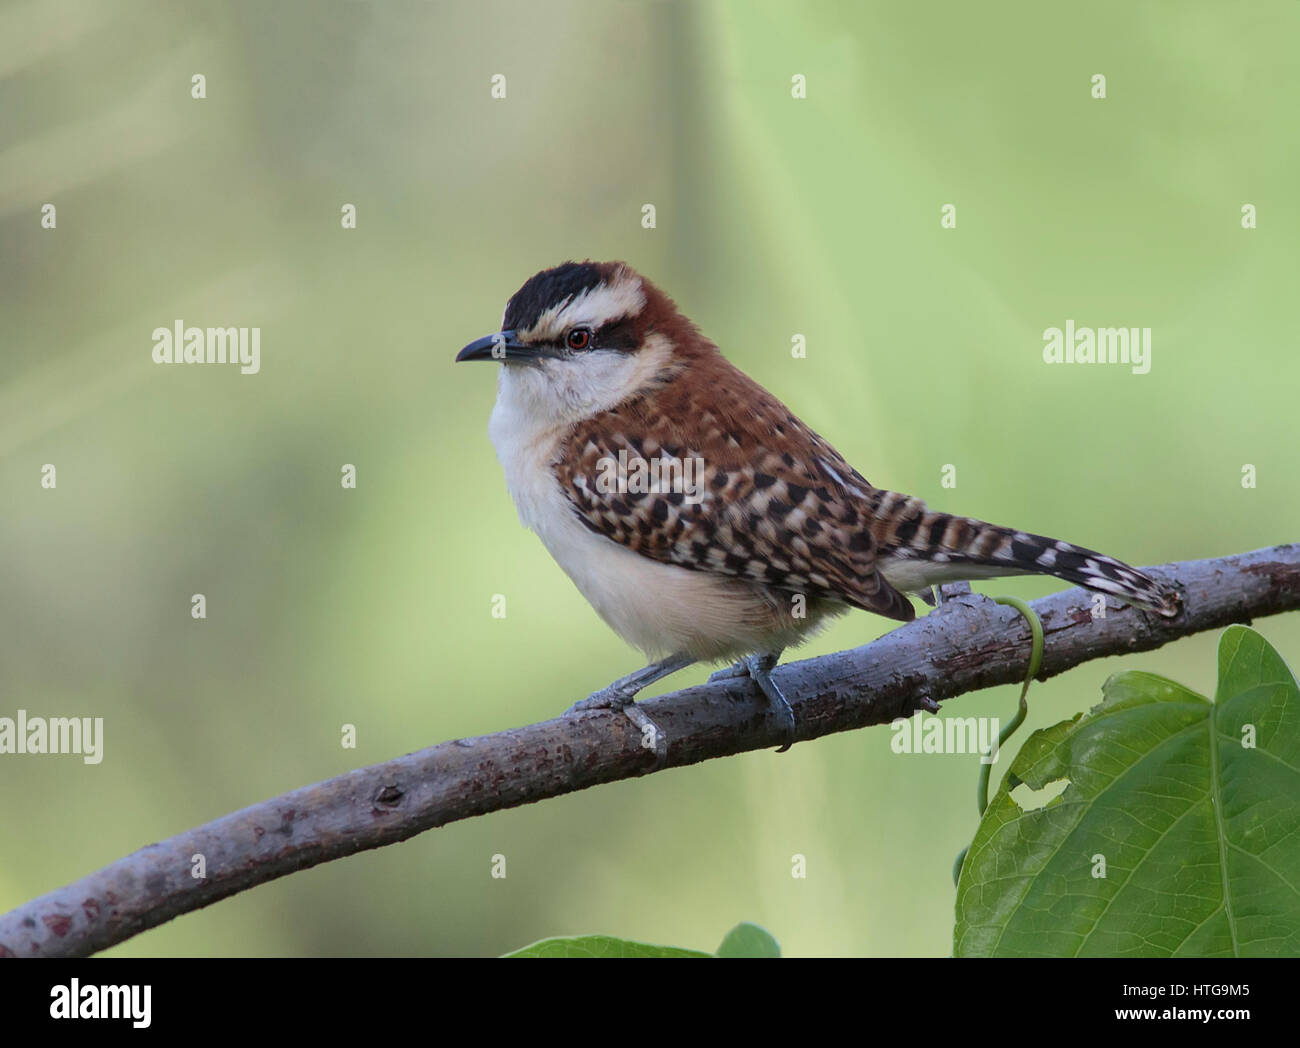 Closeup of a Rufous-naped Wren perched on a branch Stock Photo